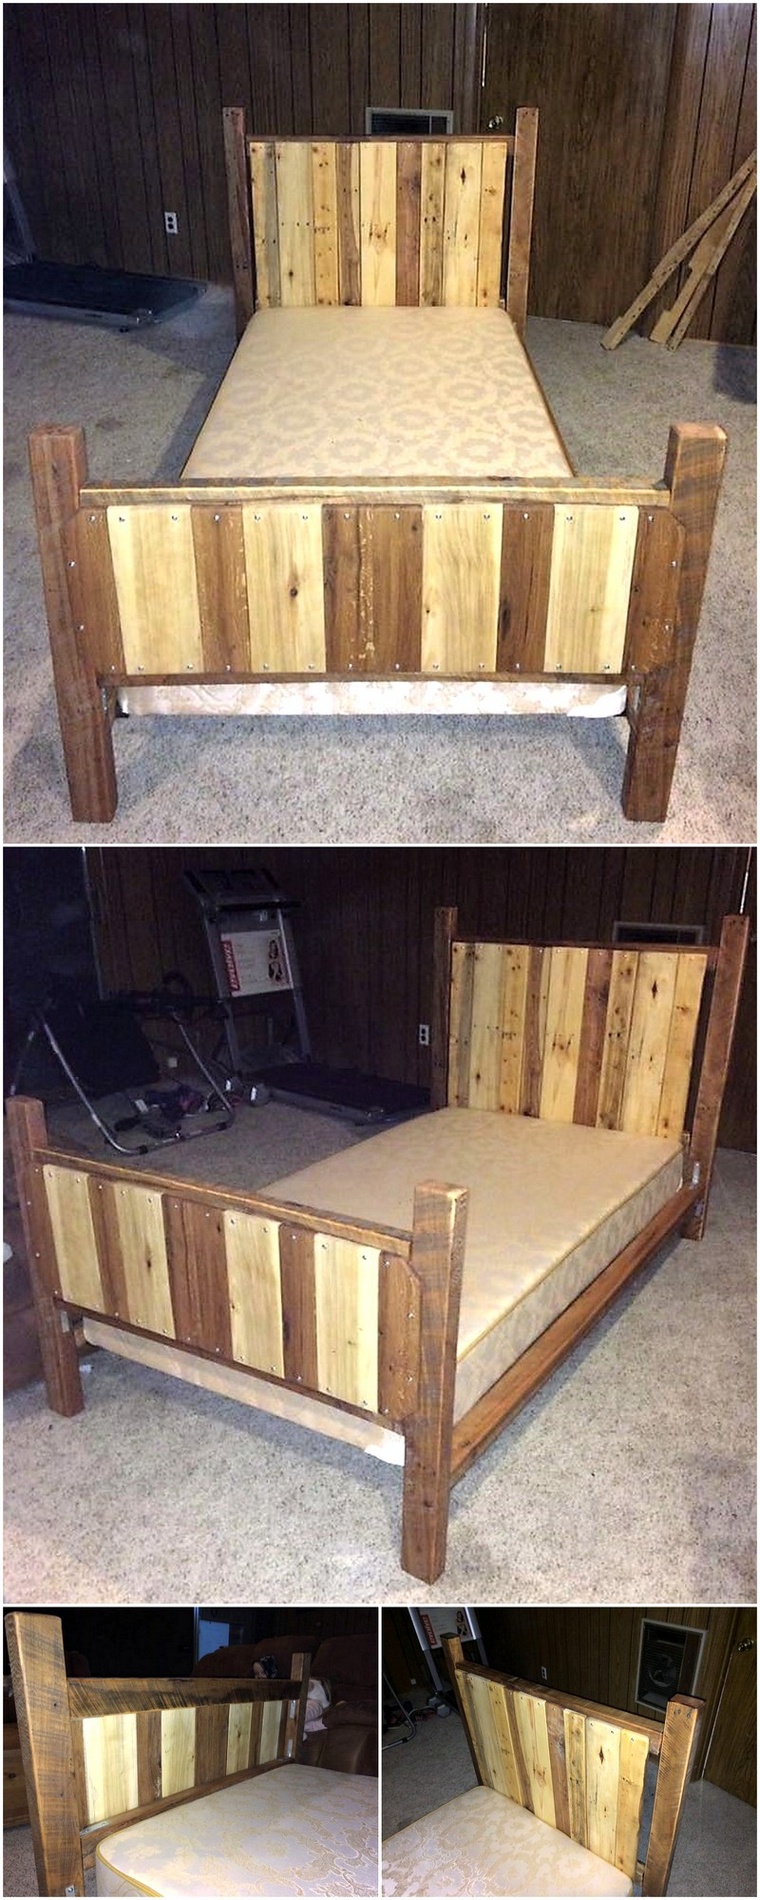 Some Creative Woodworking Ideas with Pallets | Wood Pallet ...
